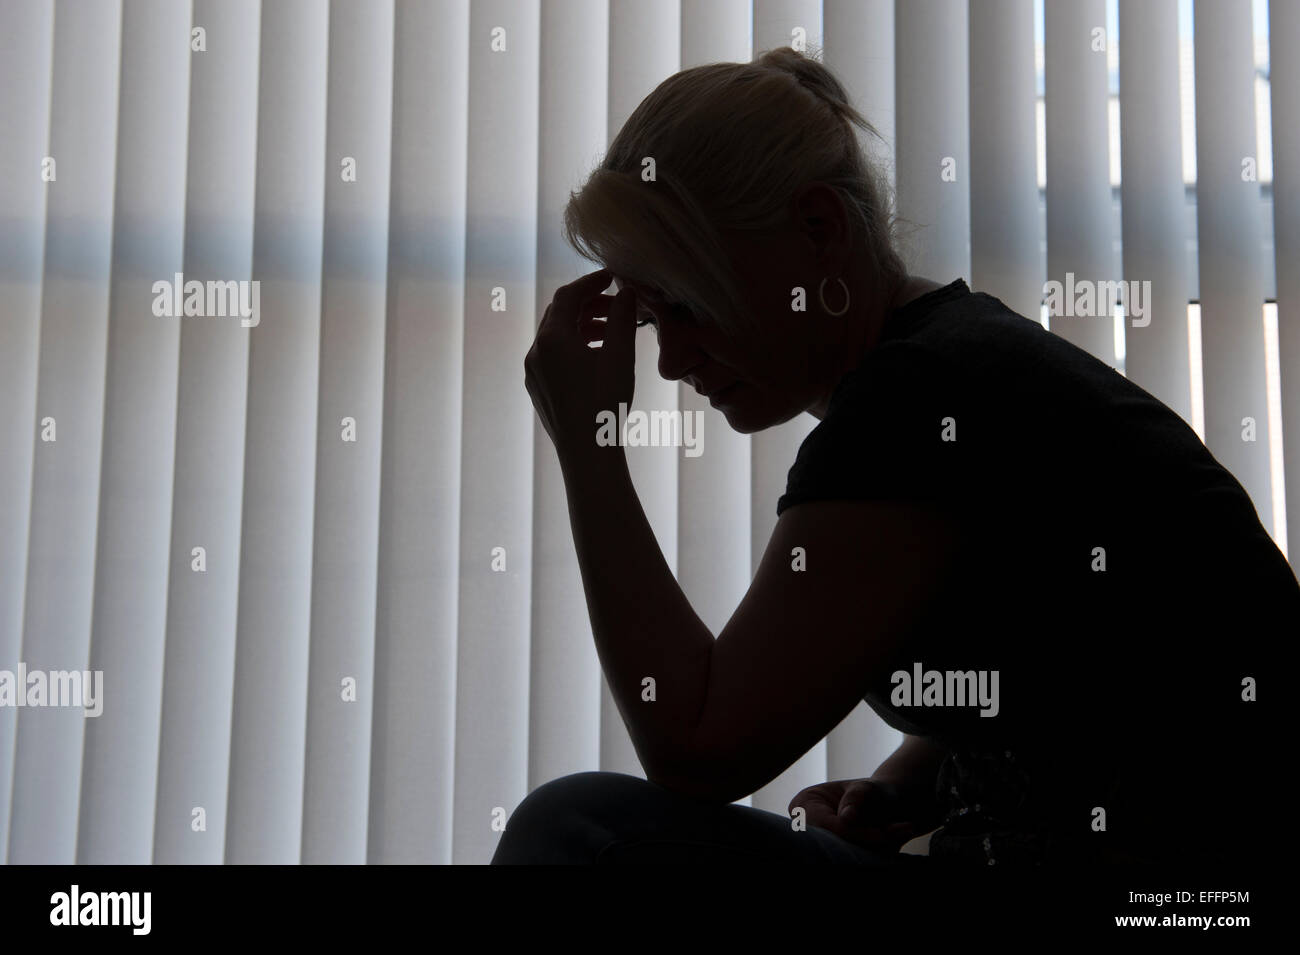 A middle aged woman silhouetted against window blinds leans over with her head in her hands. Stock Photo